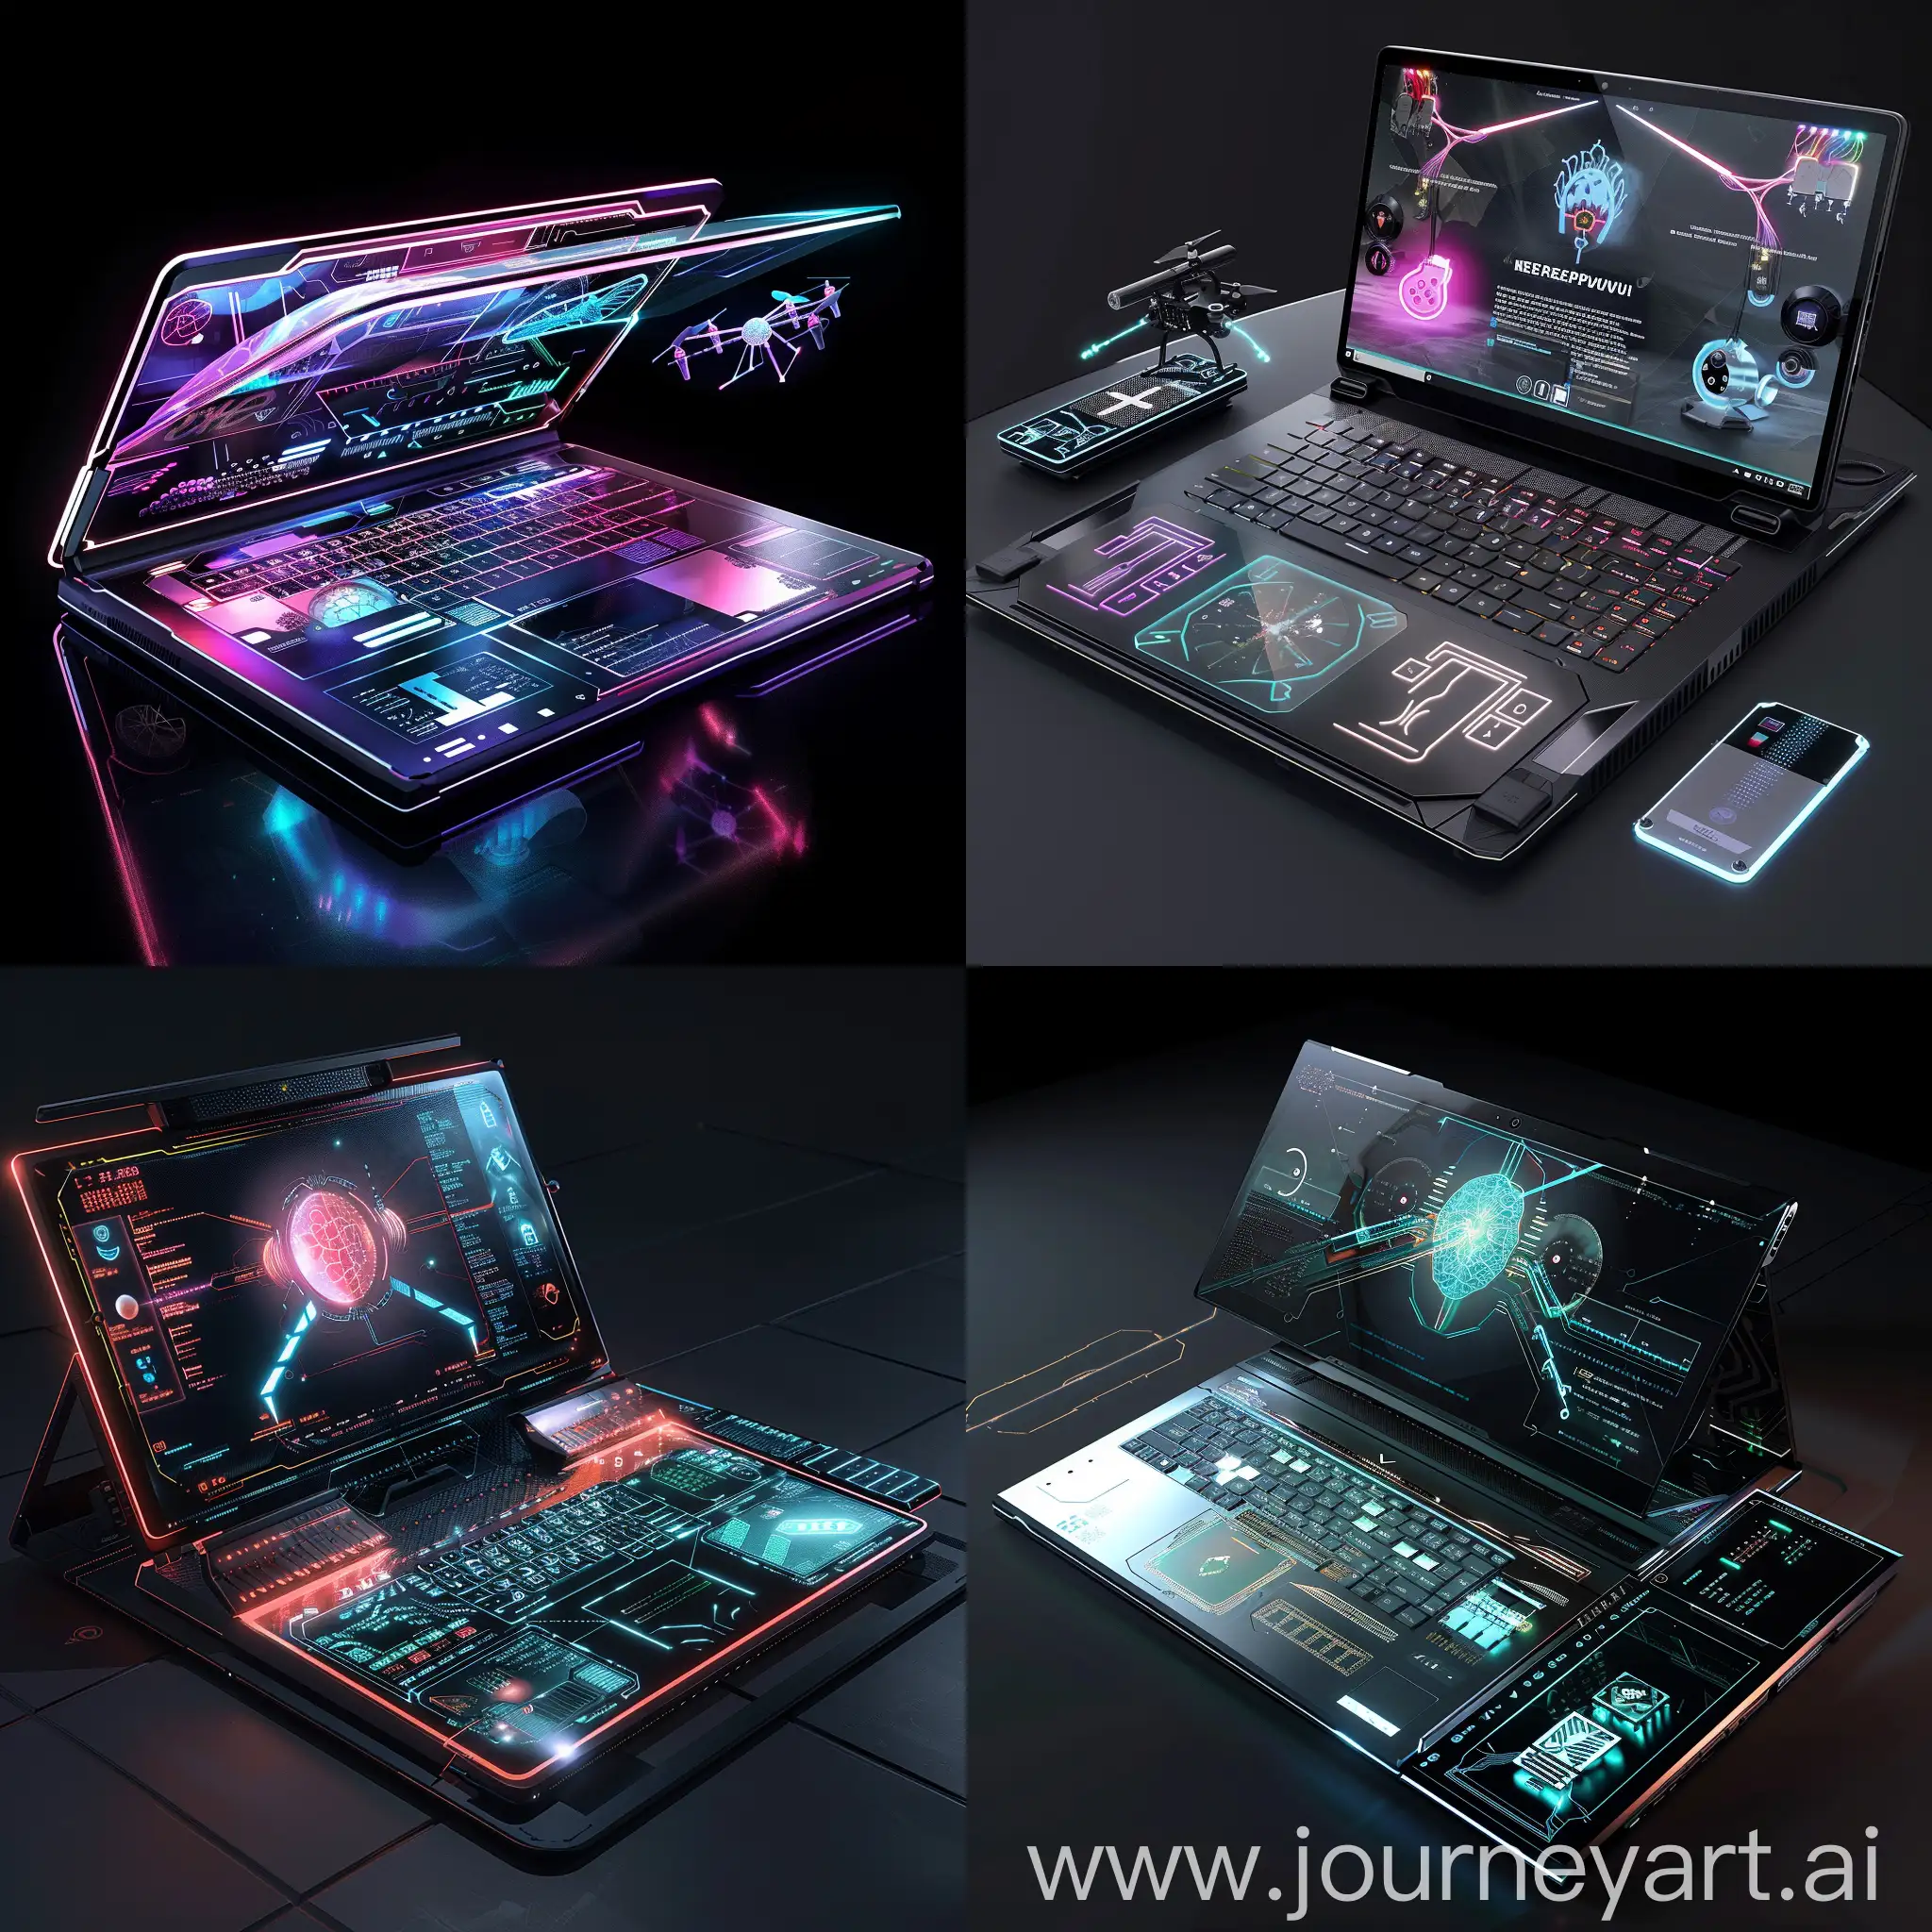 Futuristic-Laptop-with-Neural-Processing-Unit-NPU-and-Holographic-Display